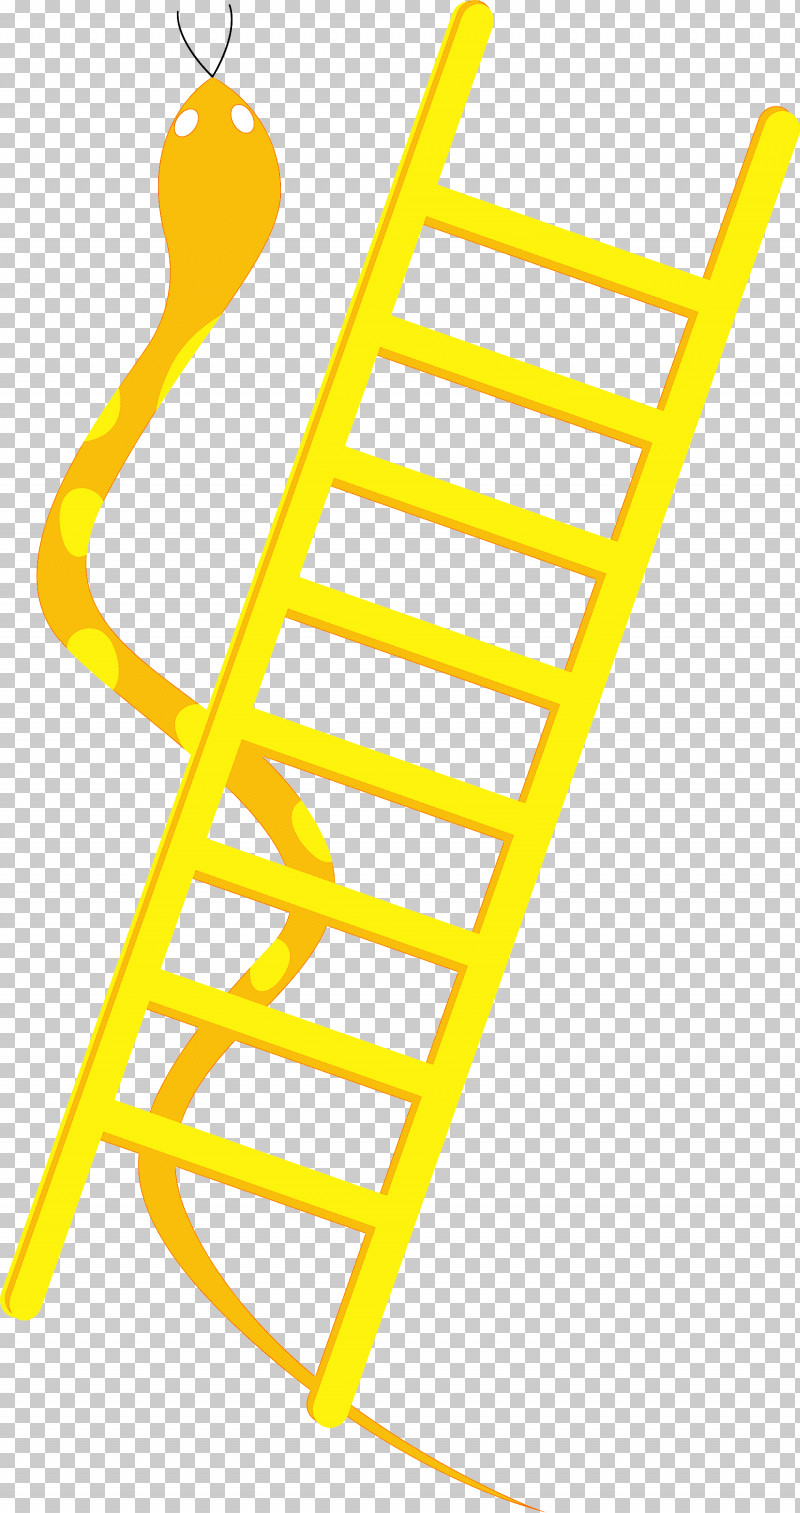 Yellow Ladder PNG, Clipart, Ladder, Yellow Free PNG Download